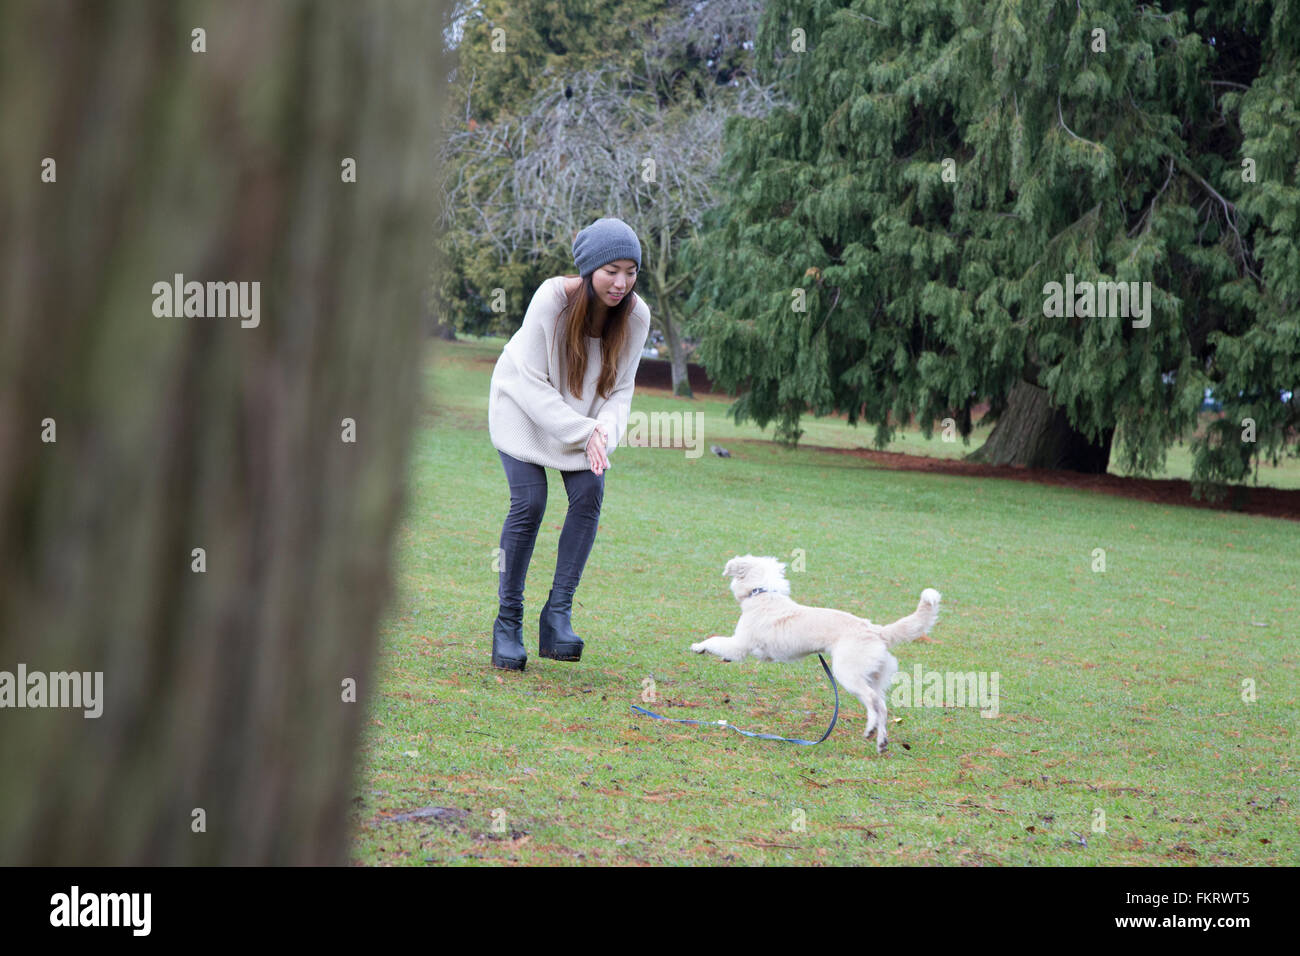 Japanese woman Playing with dog in park Banque D'Images